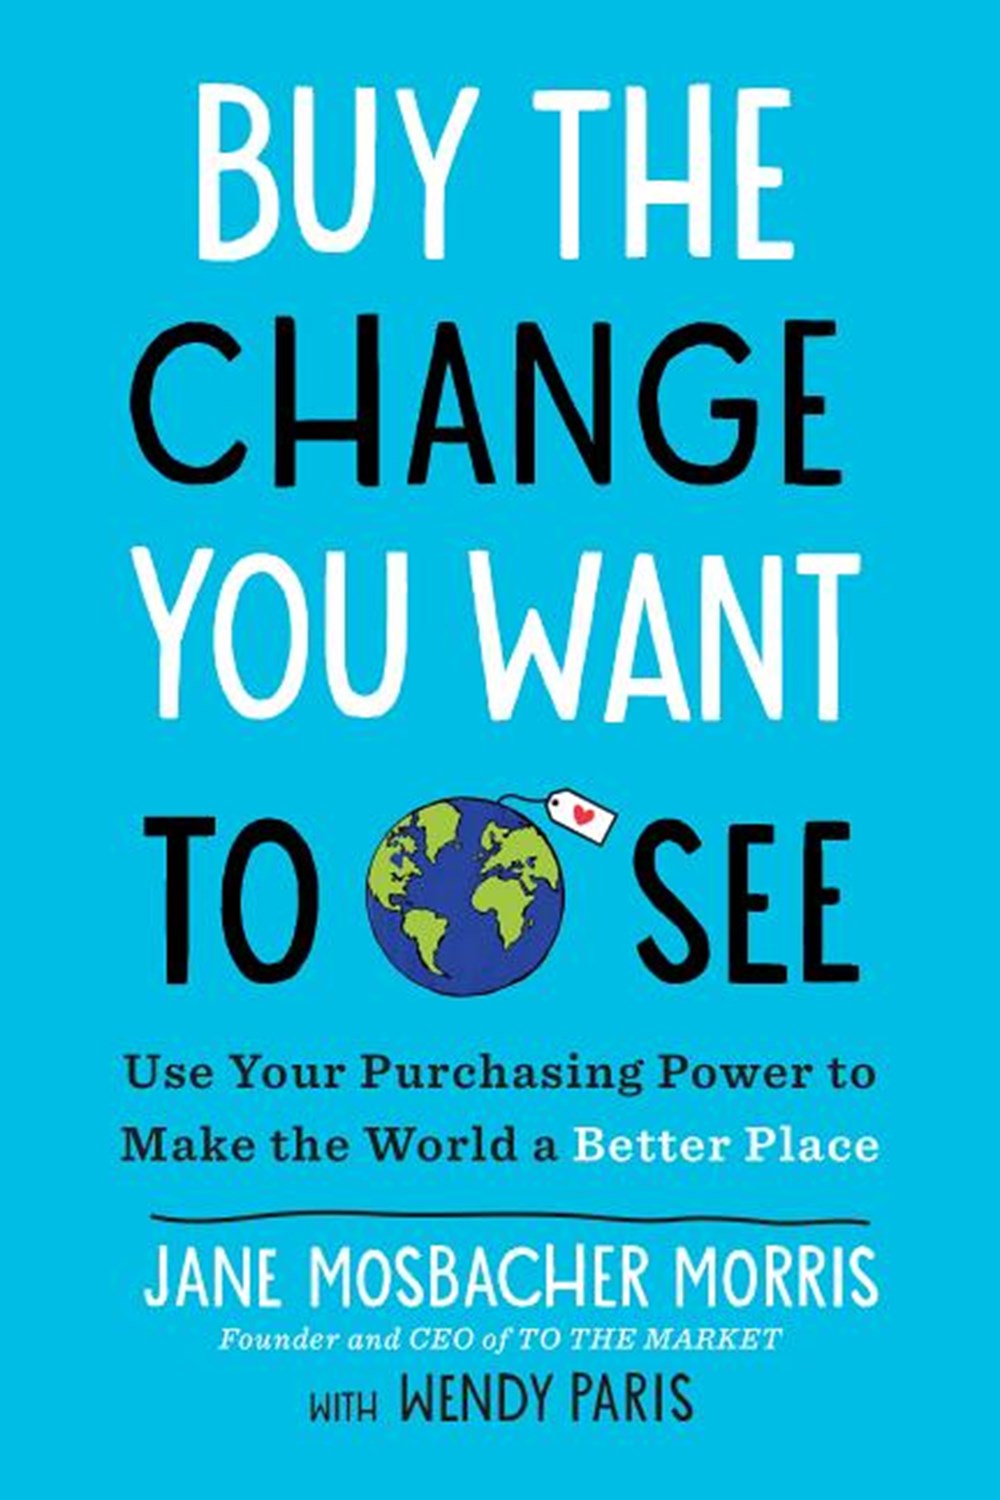 Buy the Change You Want to See, by Jane Mosbacher Morris